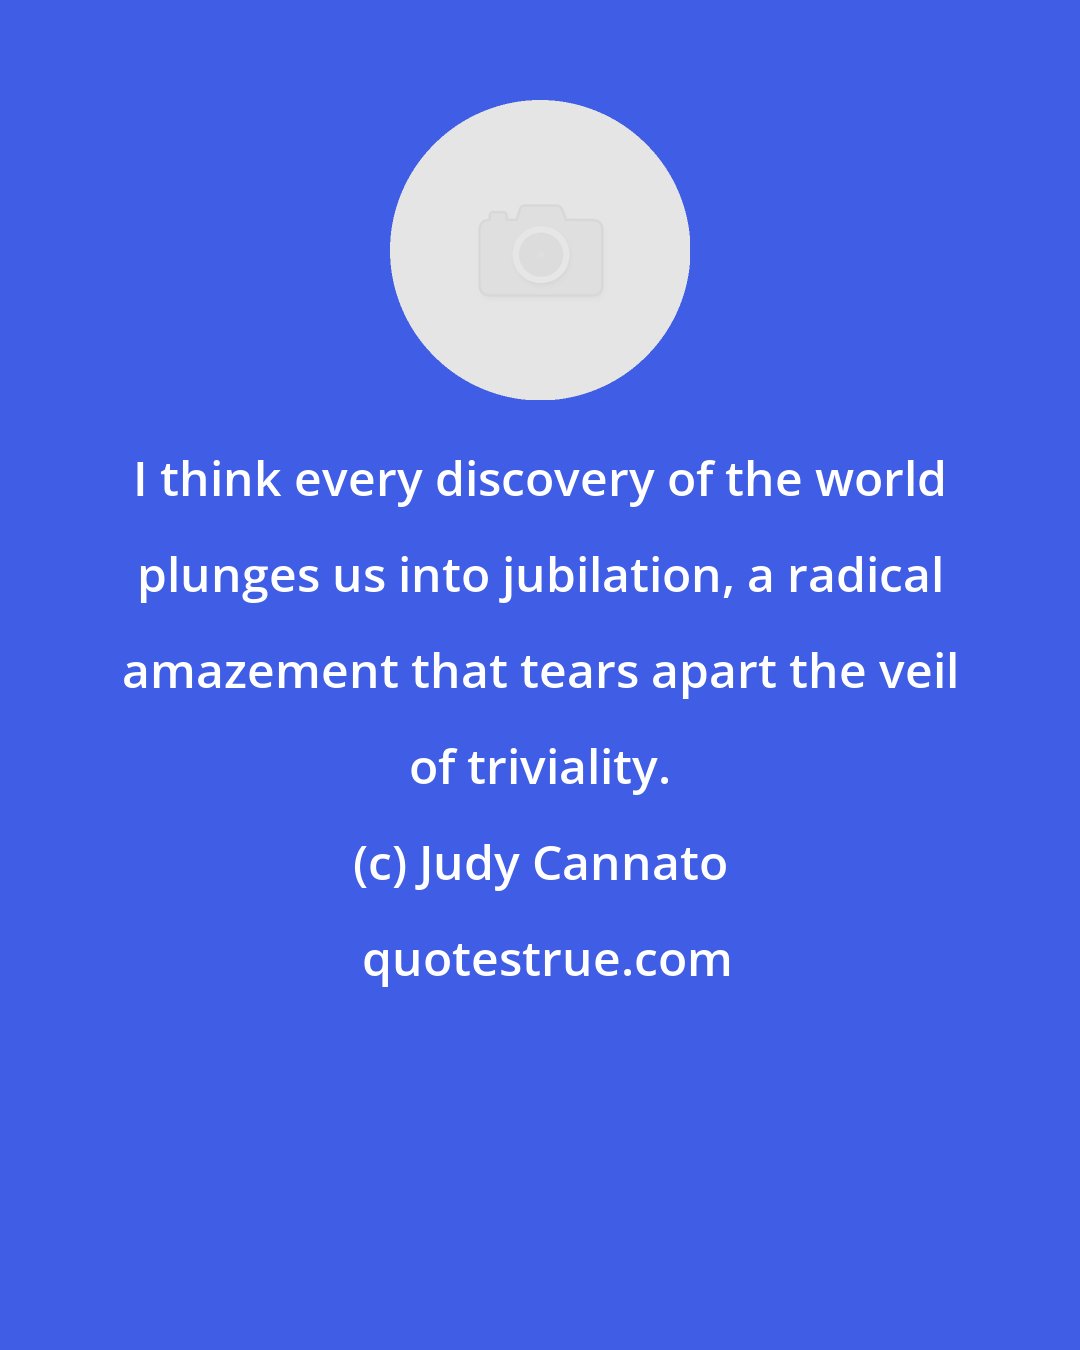 Judy Cannato: I think every discovery of the world plunges us into jubilation, a radical amazement that tears apart the veil of triviality.